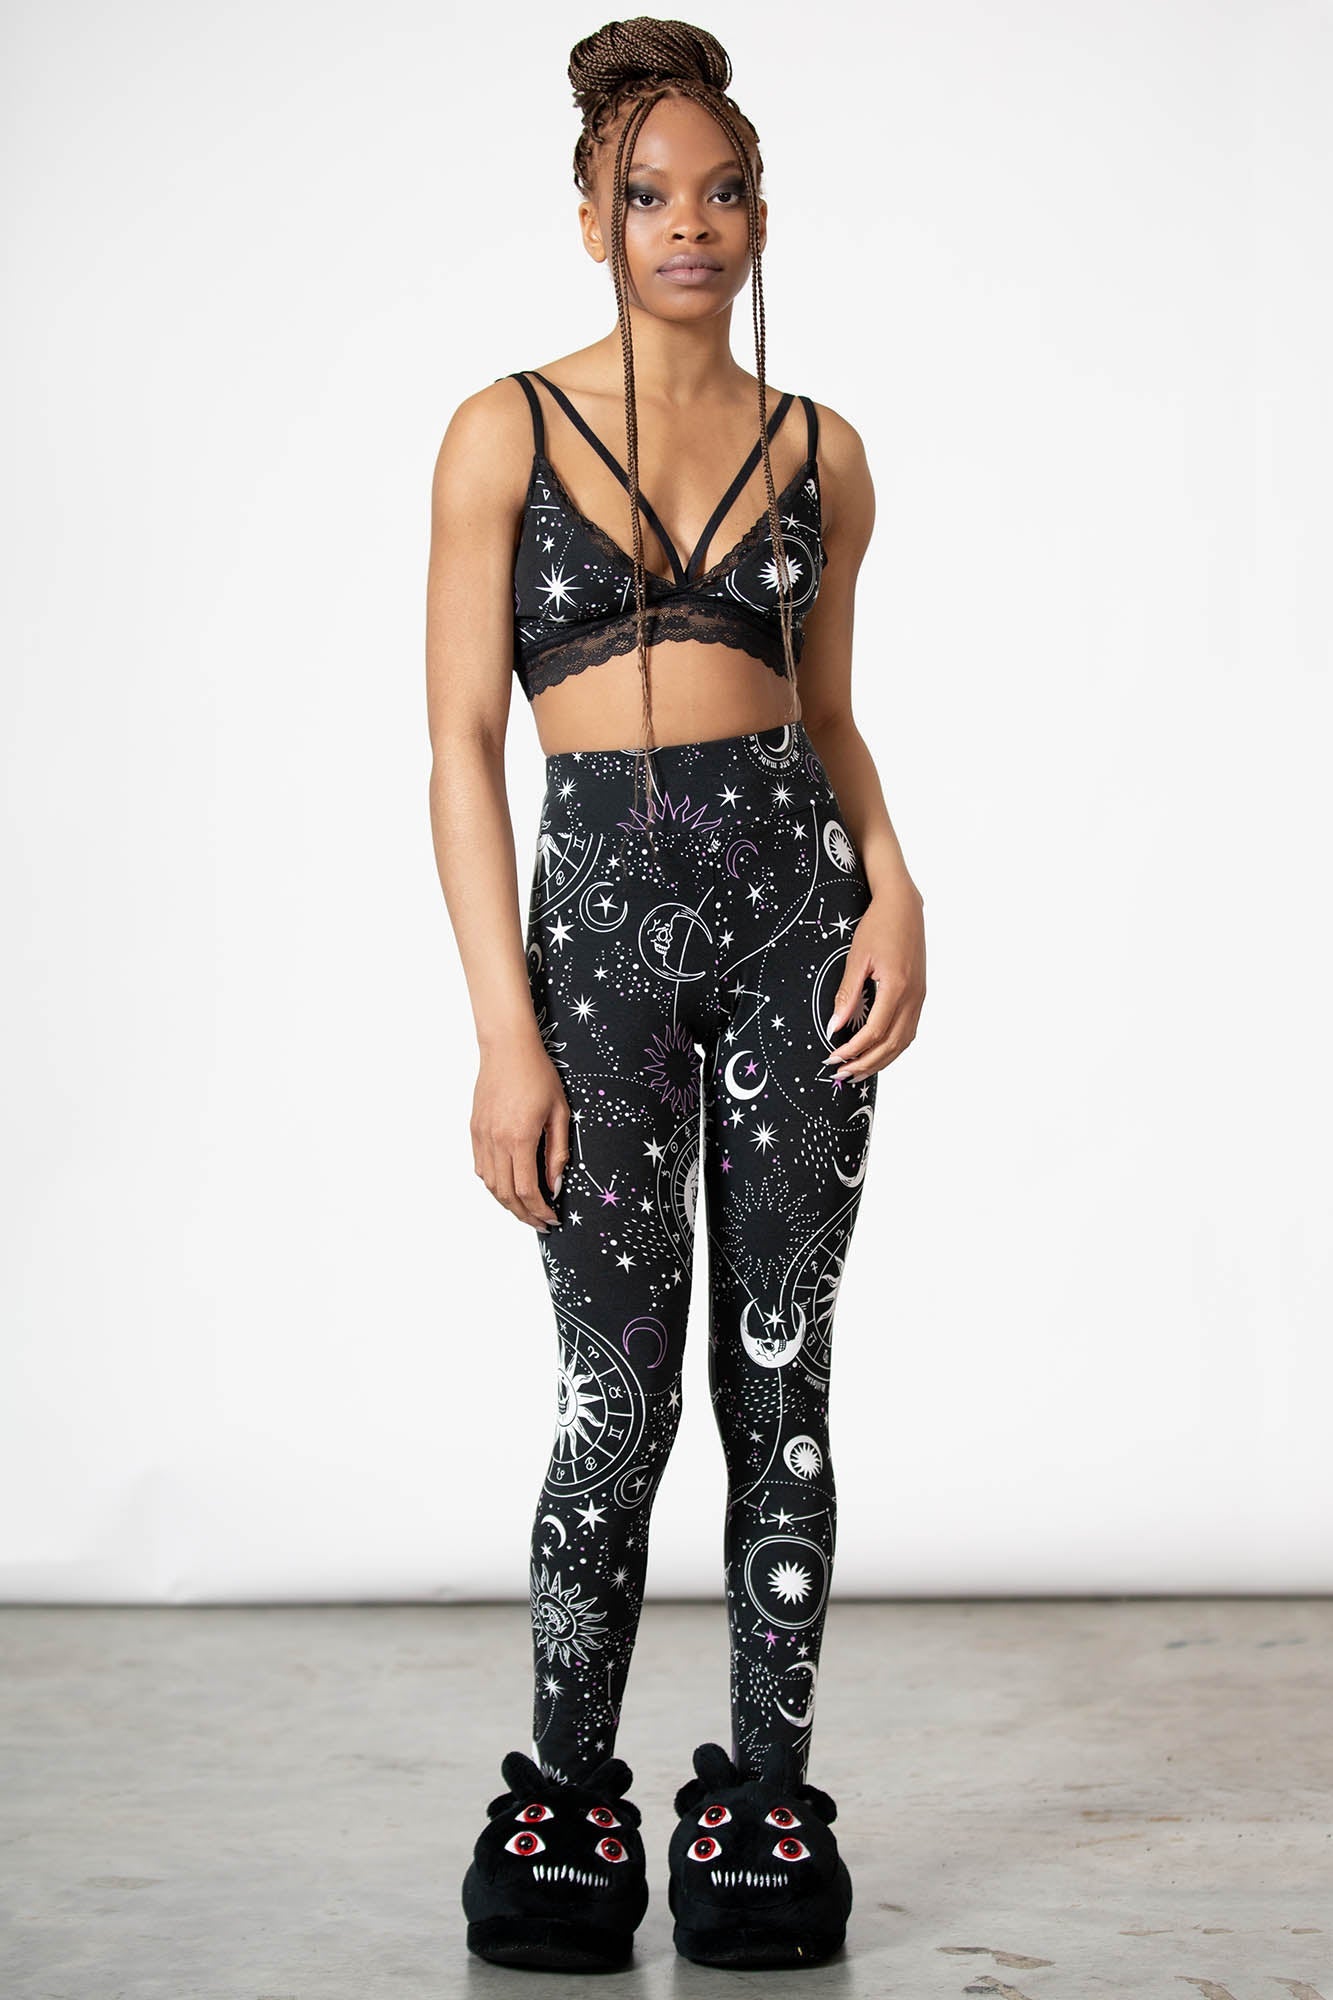 Stylish Galaxy Leggings and Backpack for Fashionable Streetwear